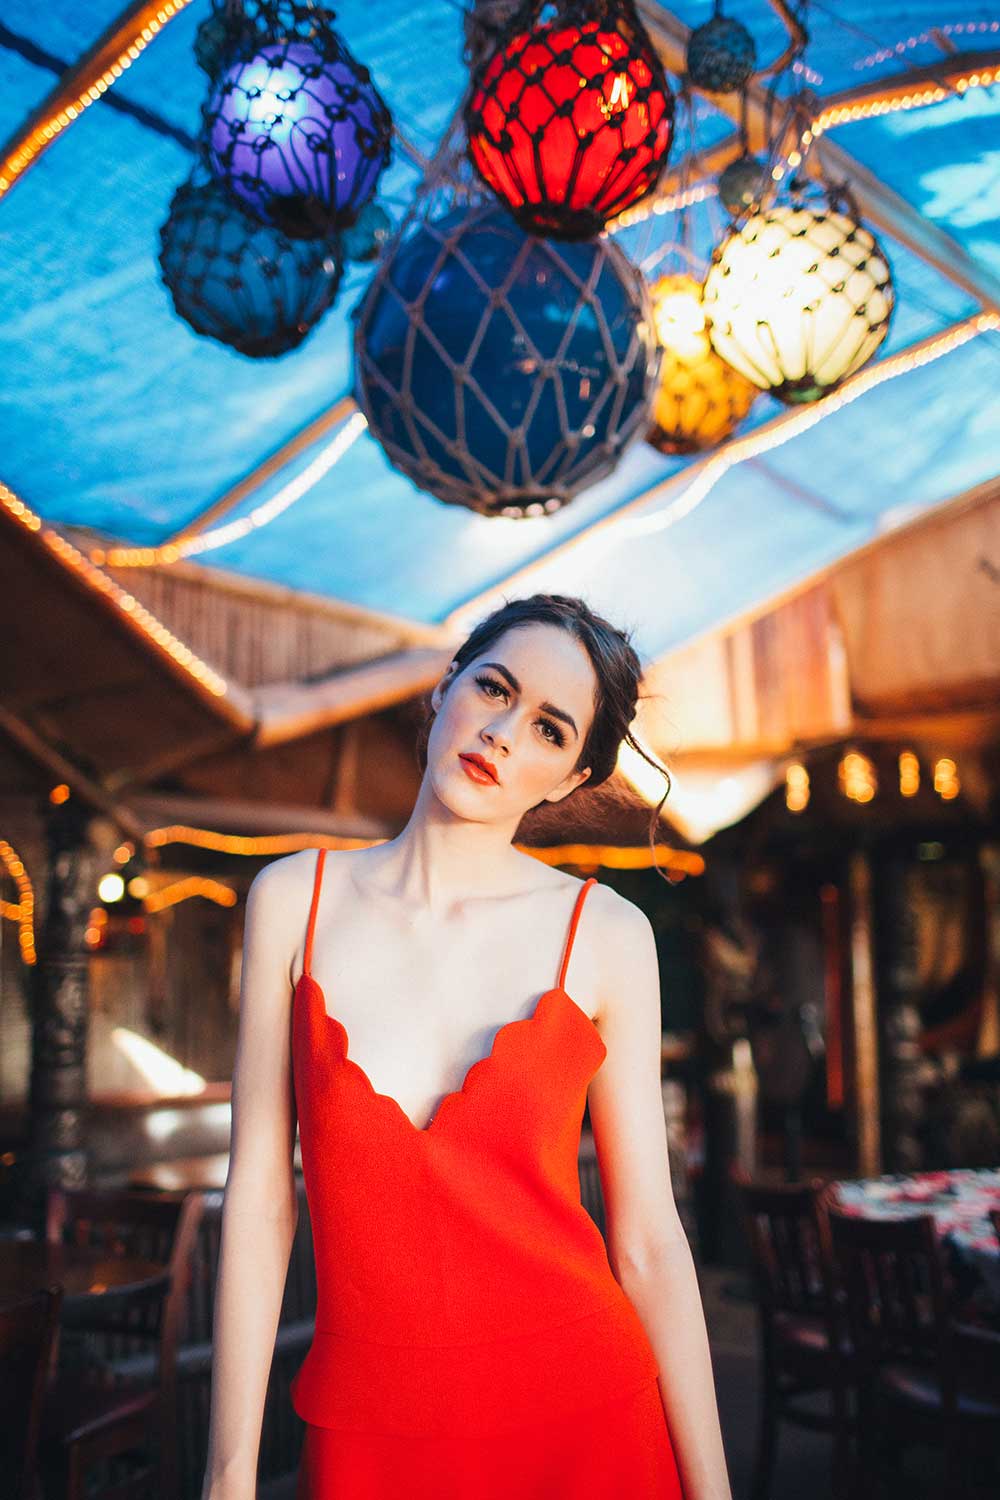 woman in sleeveless red dress standing under colorful glass lanterns